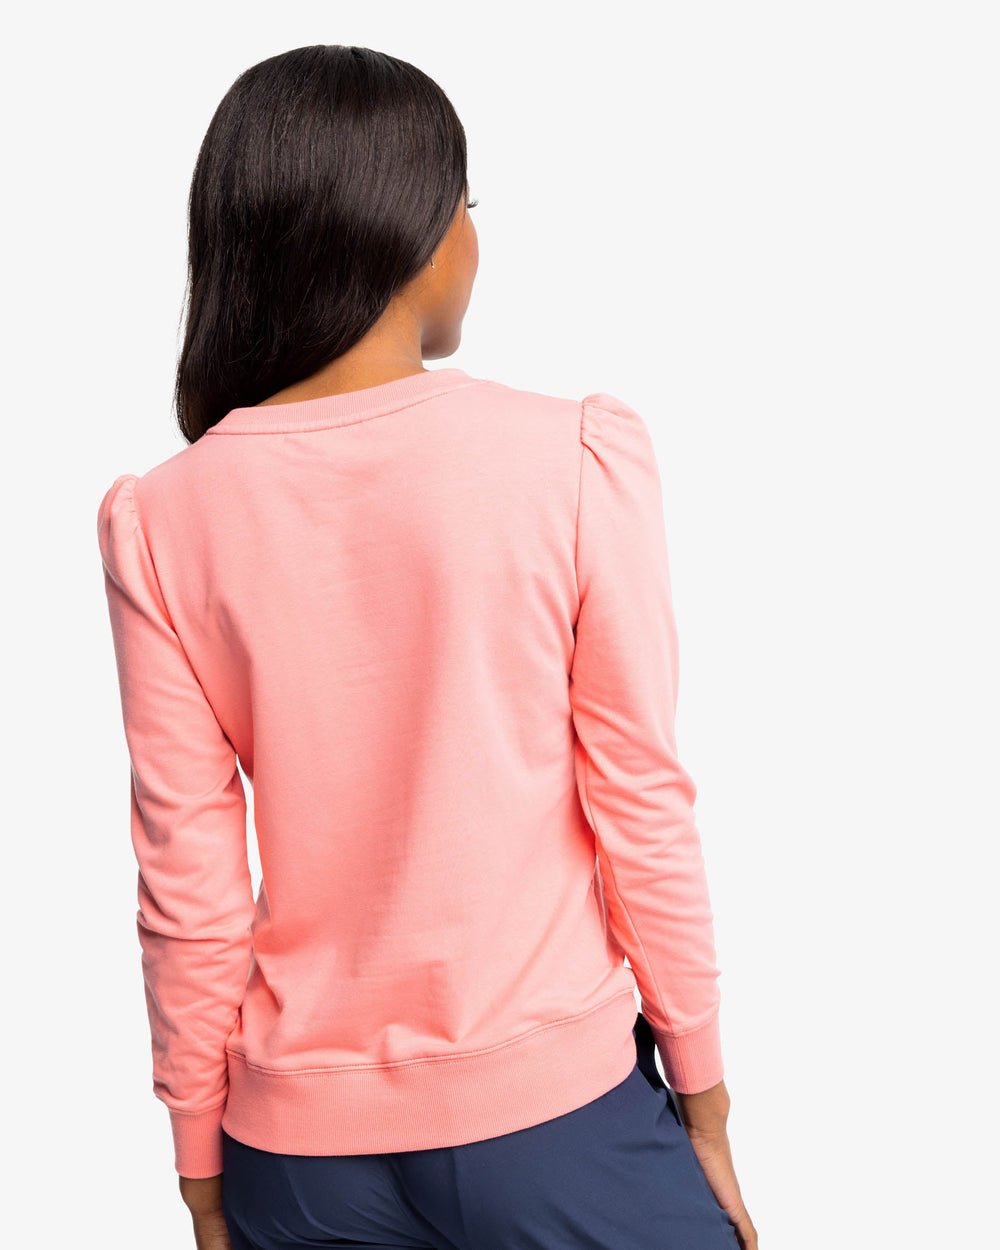 The back view of the Jayne Terry Sweatshirt by Southern Tide - Rouge Red